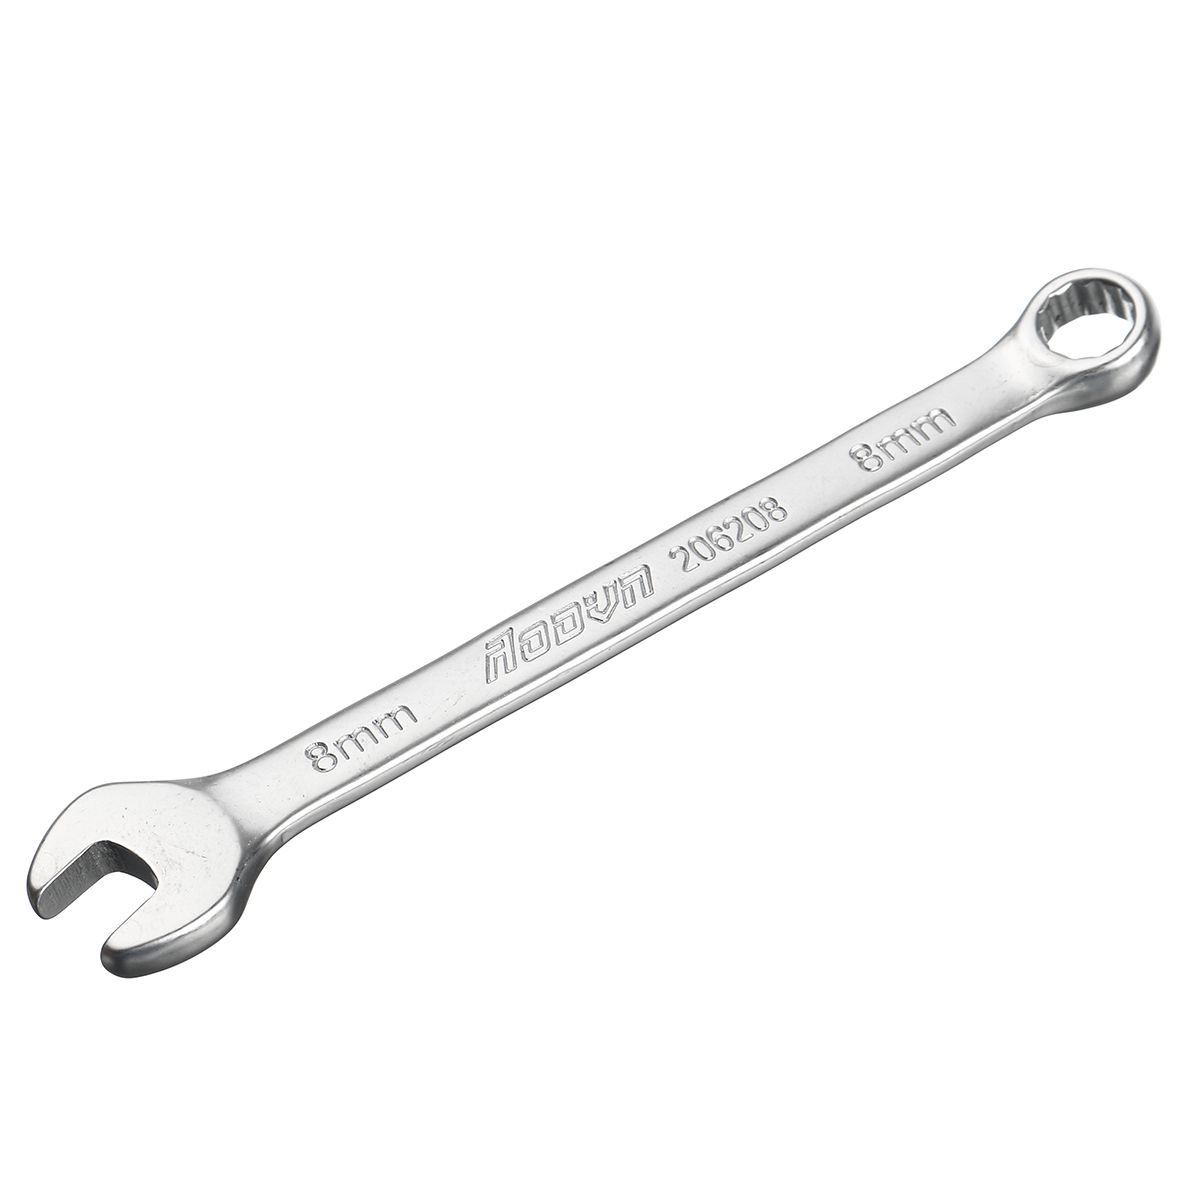 8-22mm-Reversible-Head-Ratchet-Wrench-Socket-Spanner-Nut-Polished-Hand-Tool-1690331